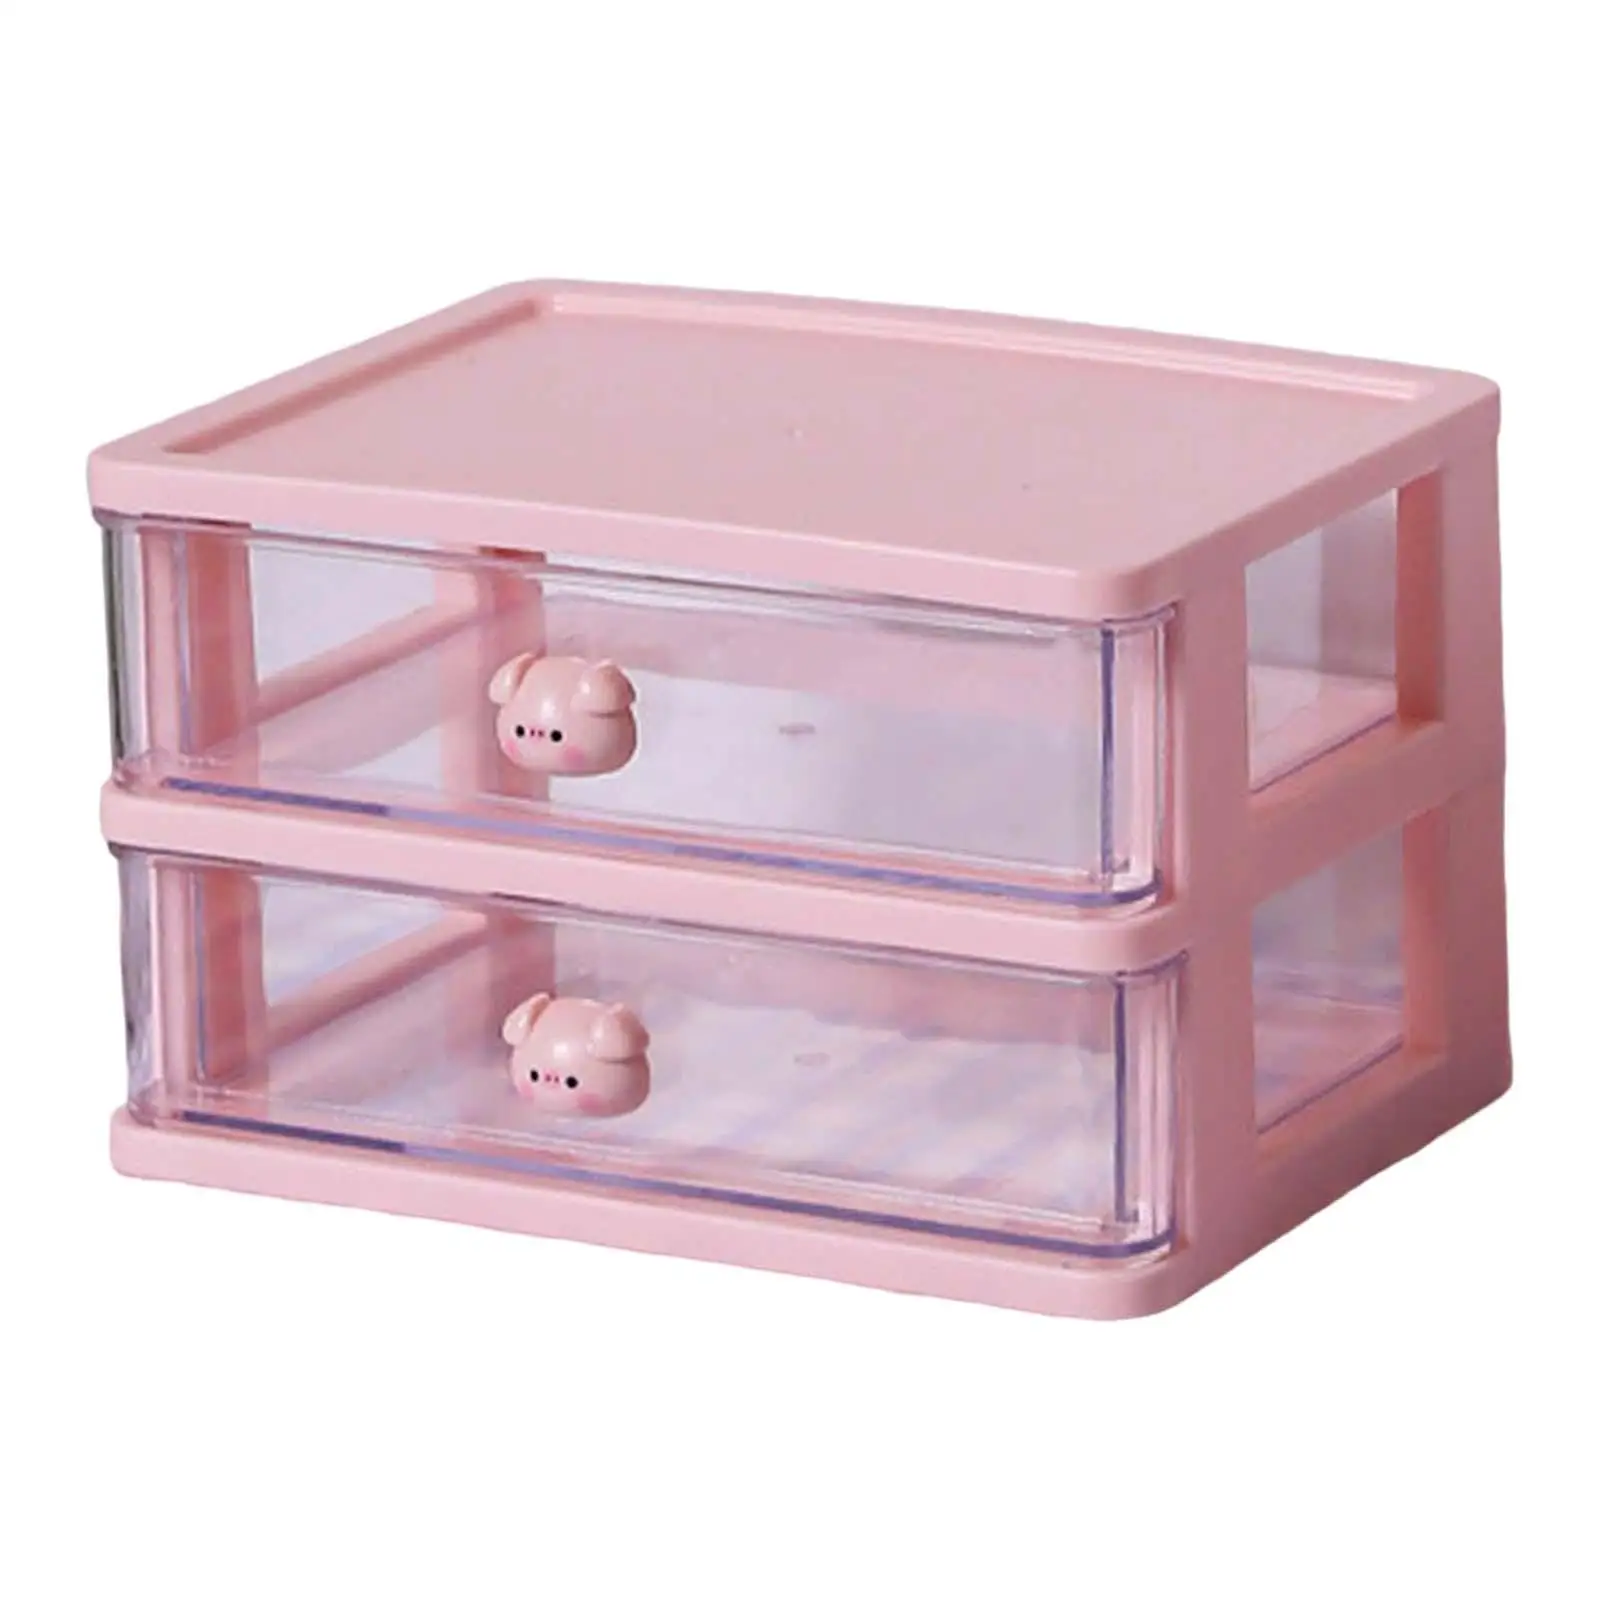 Desktop Drawer Organizer Storage Drawers Case Desk Storage Boxes Container Stackable Jewelry Cabinet for Bathroom Dressing Table